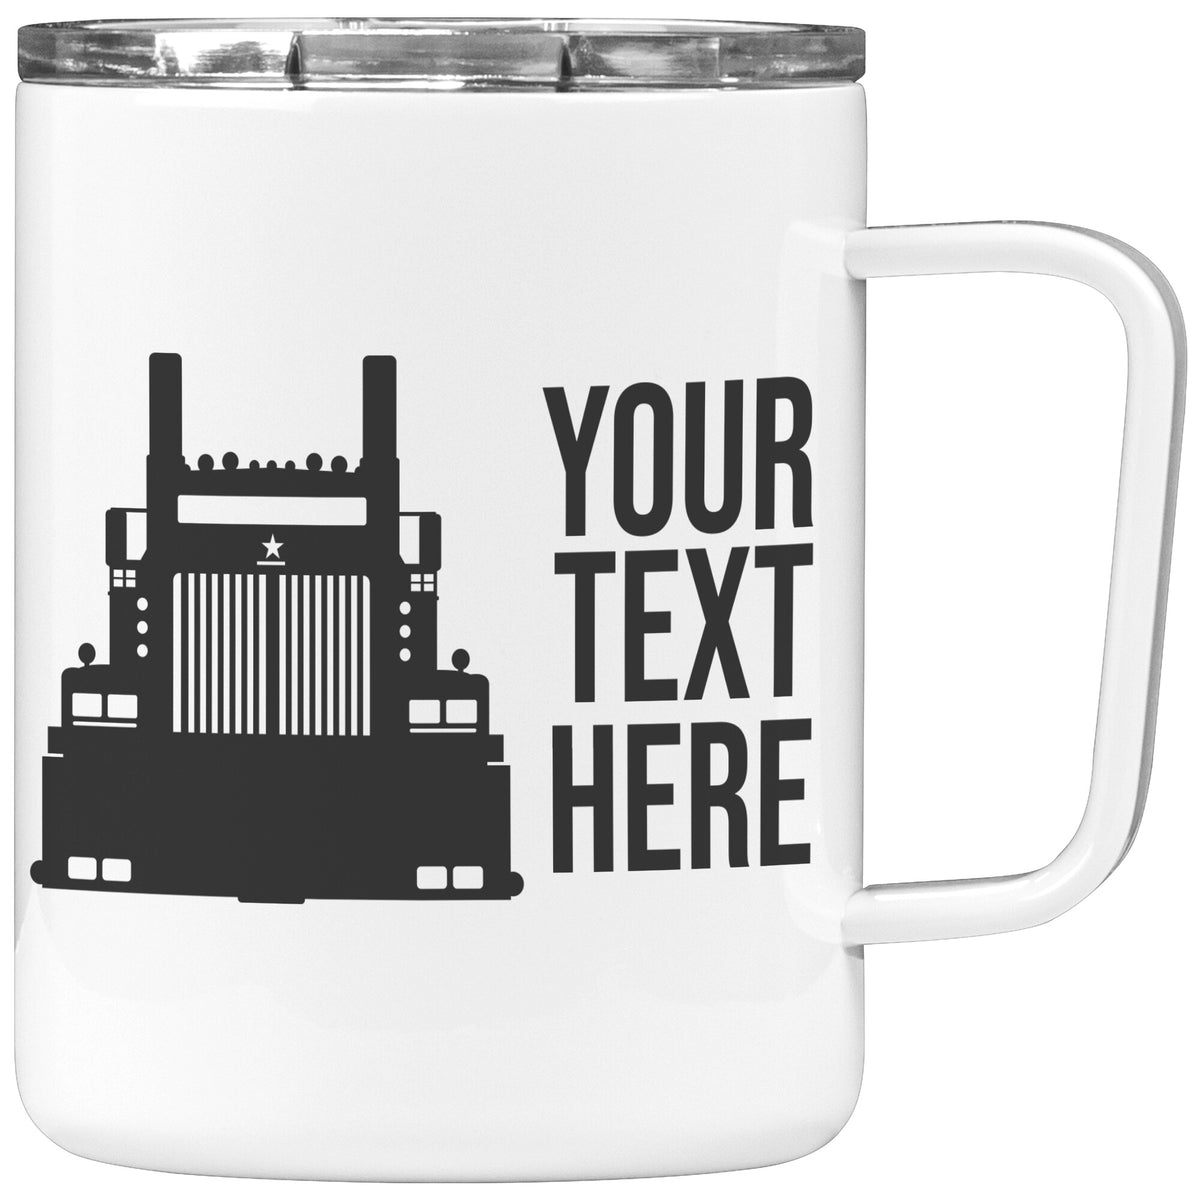 Western Star Your Text Here 10oz Insulated Coffee Mug Free Shipping